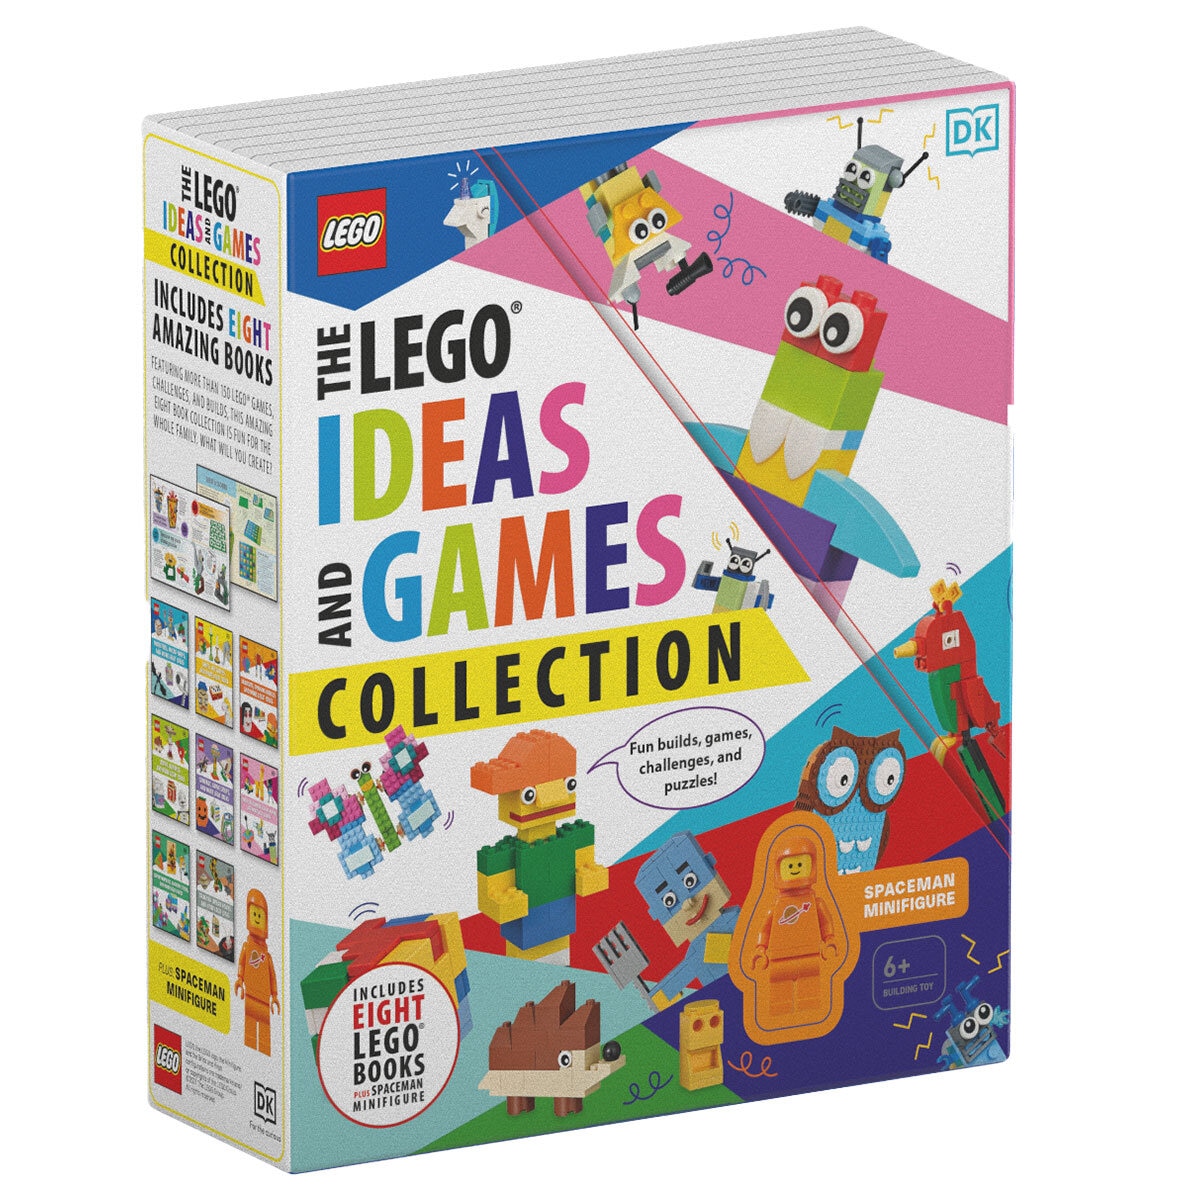 The LEGO Ideas And Games Collection